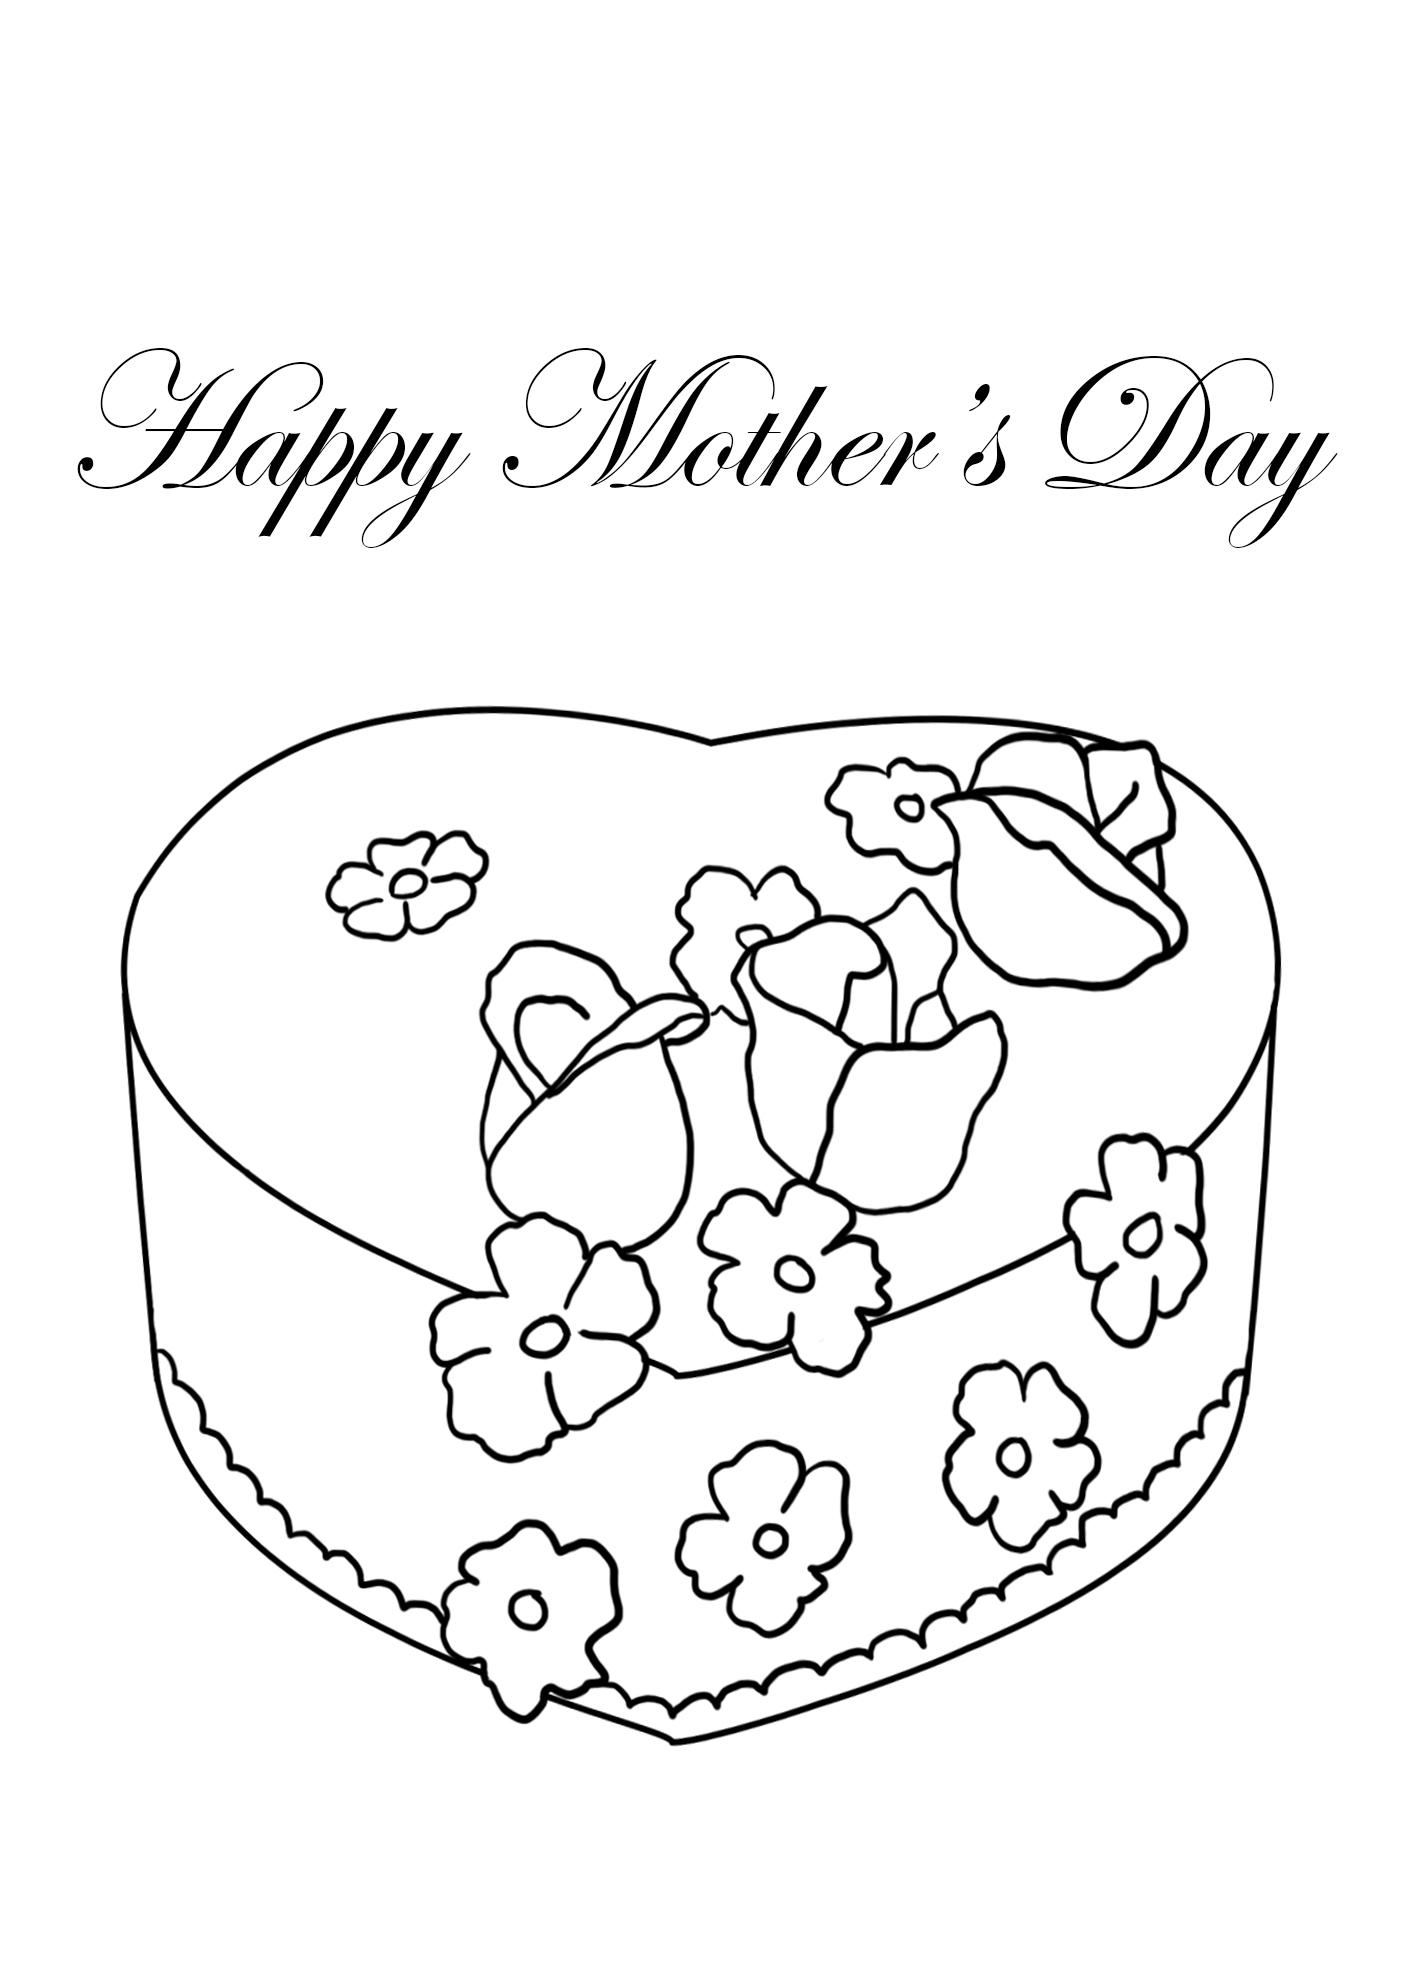 Cake coloring for Mother's day